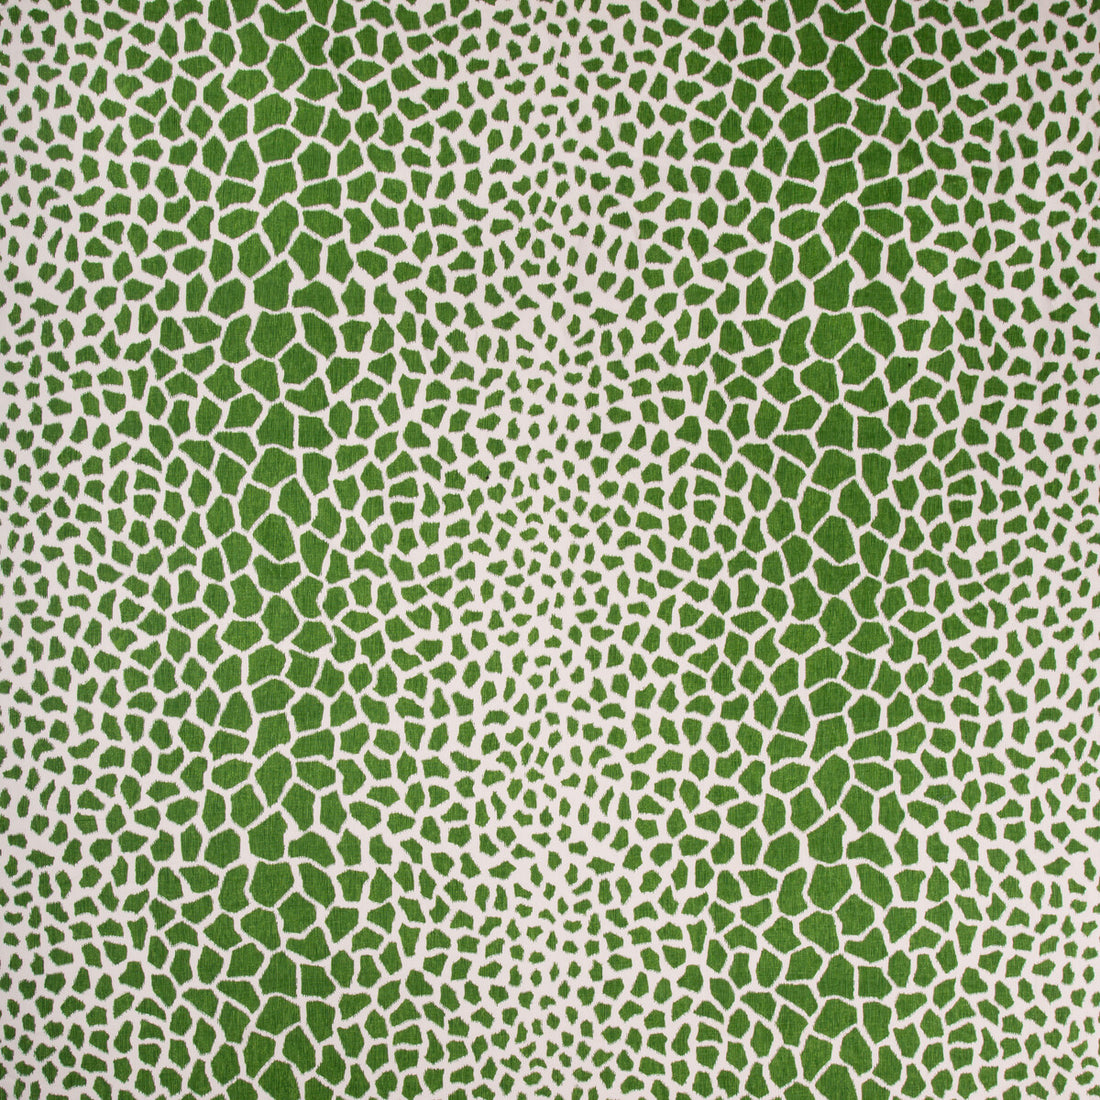 Jiraffa fabric in fern color - pattern 8018123.53.0 - by Brunschwig &amp; Fils in the Baret collection